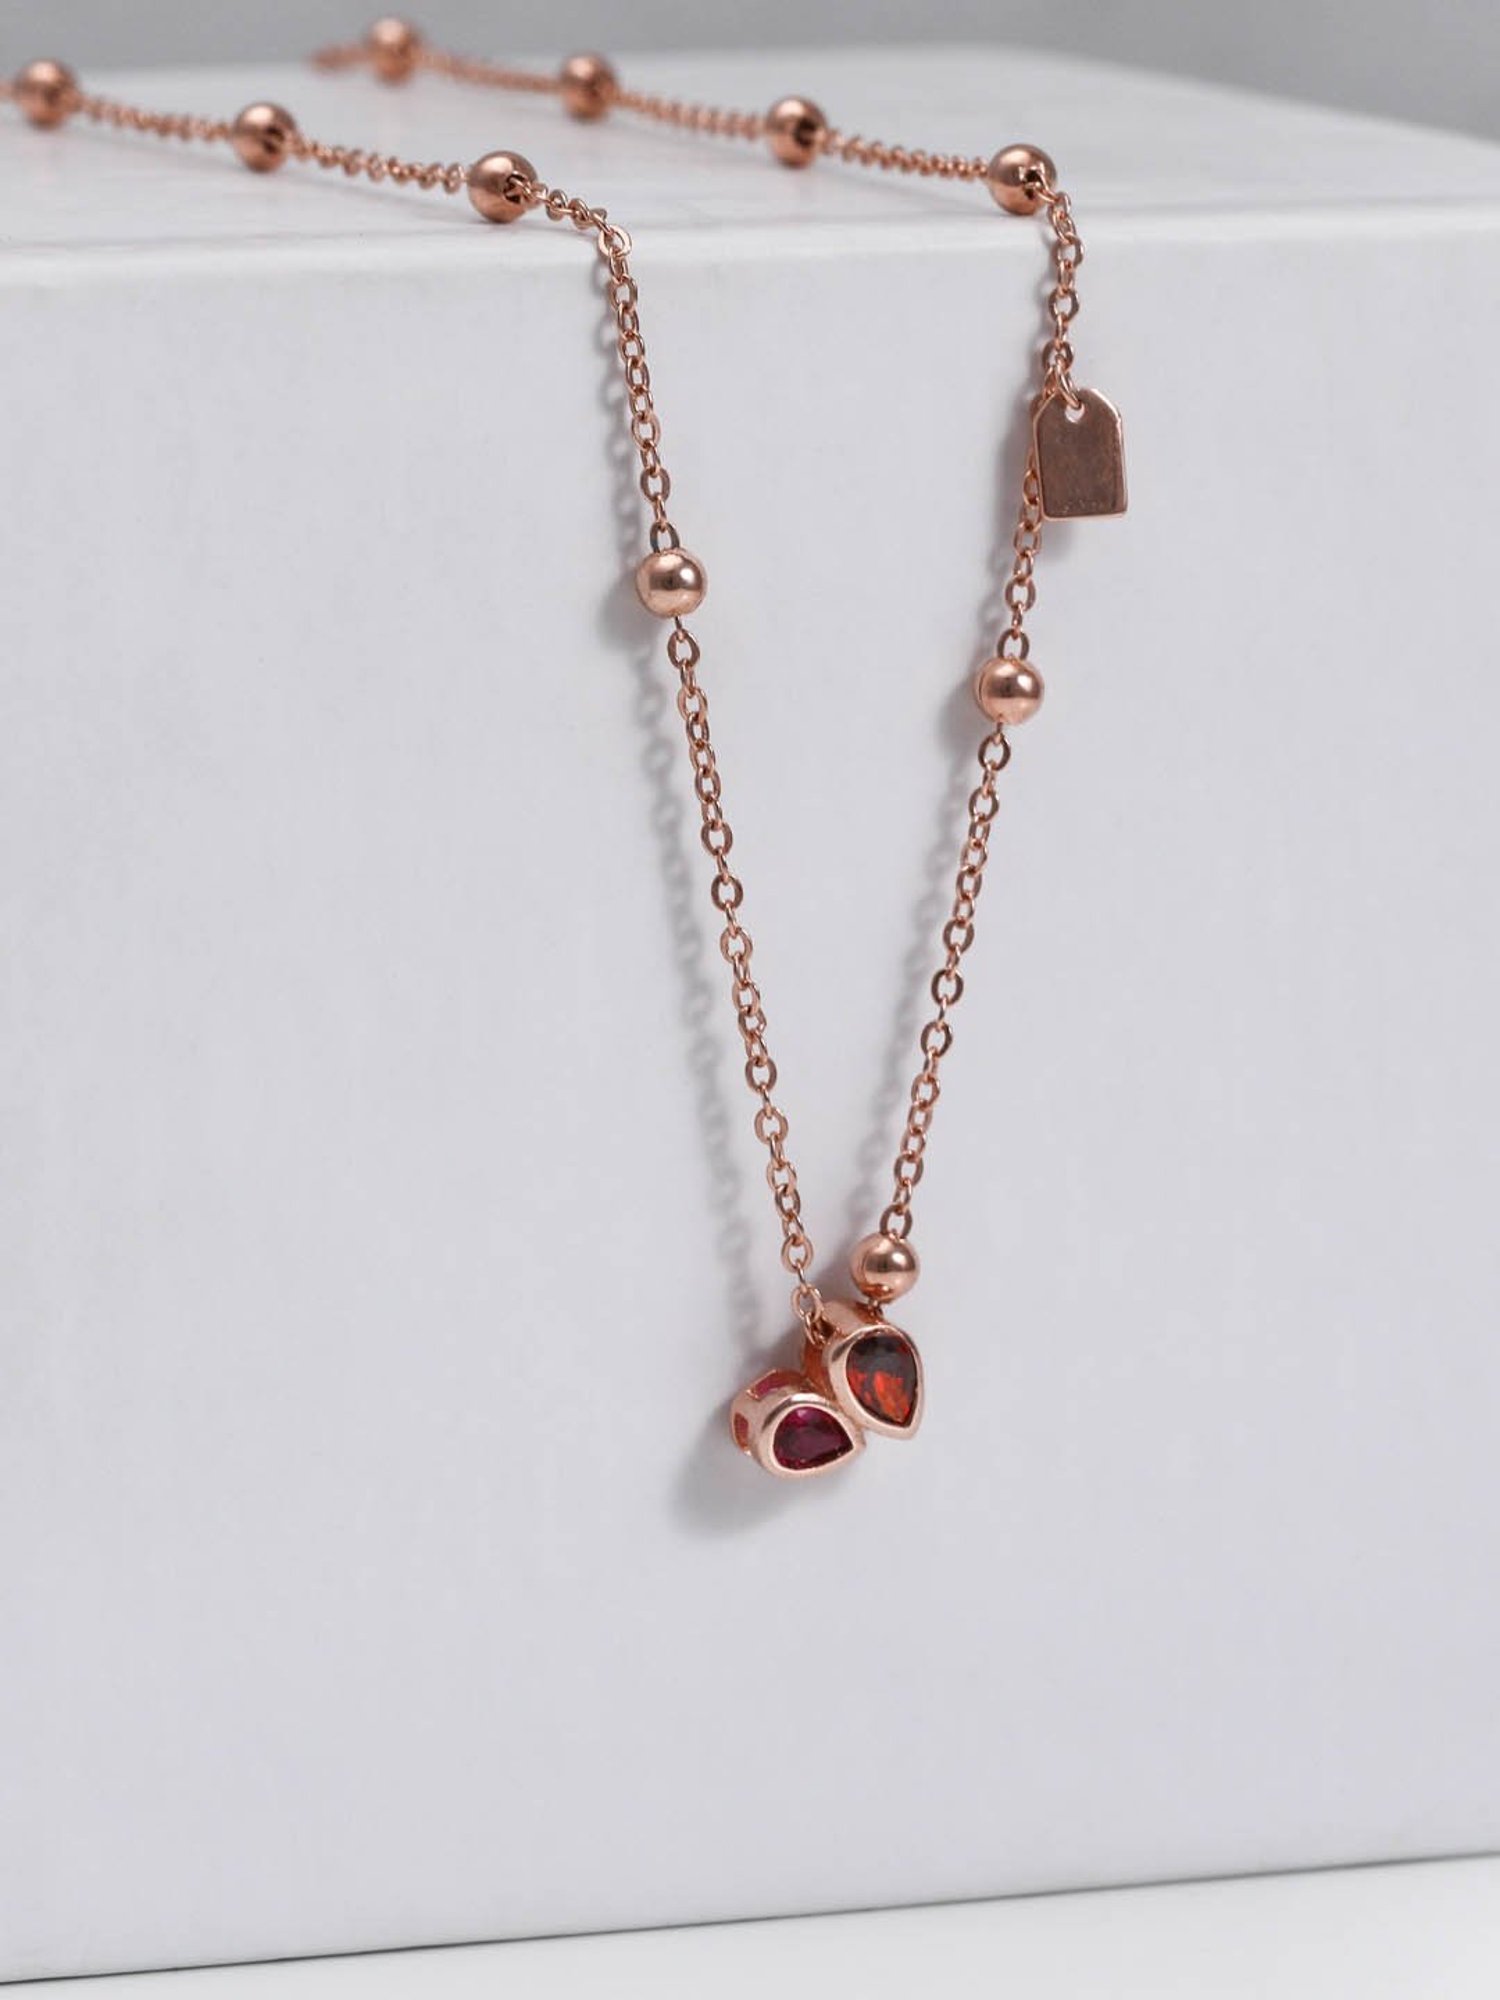 GIVA Love is Everywhere 92.5 Sterling Silver Enamel You and Me Rose Gold Necklace